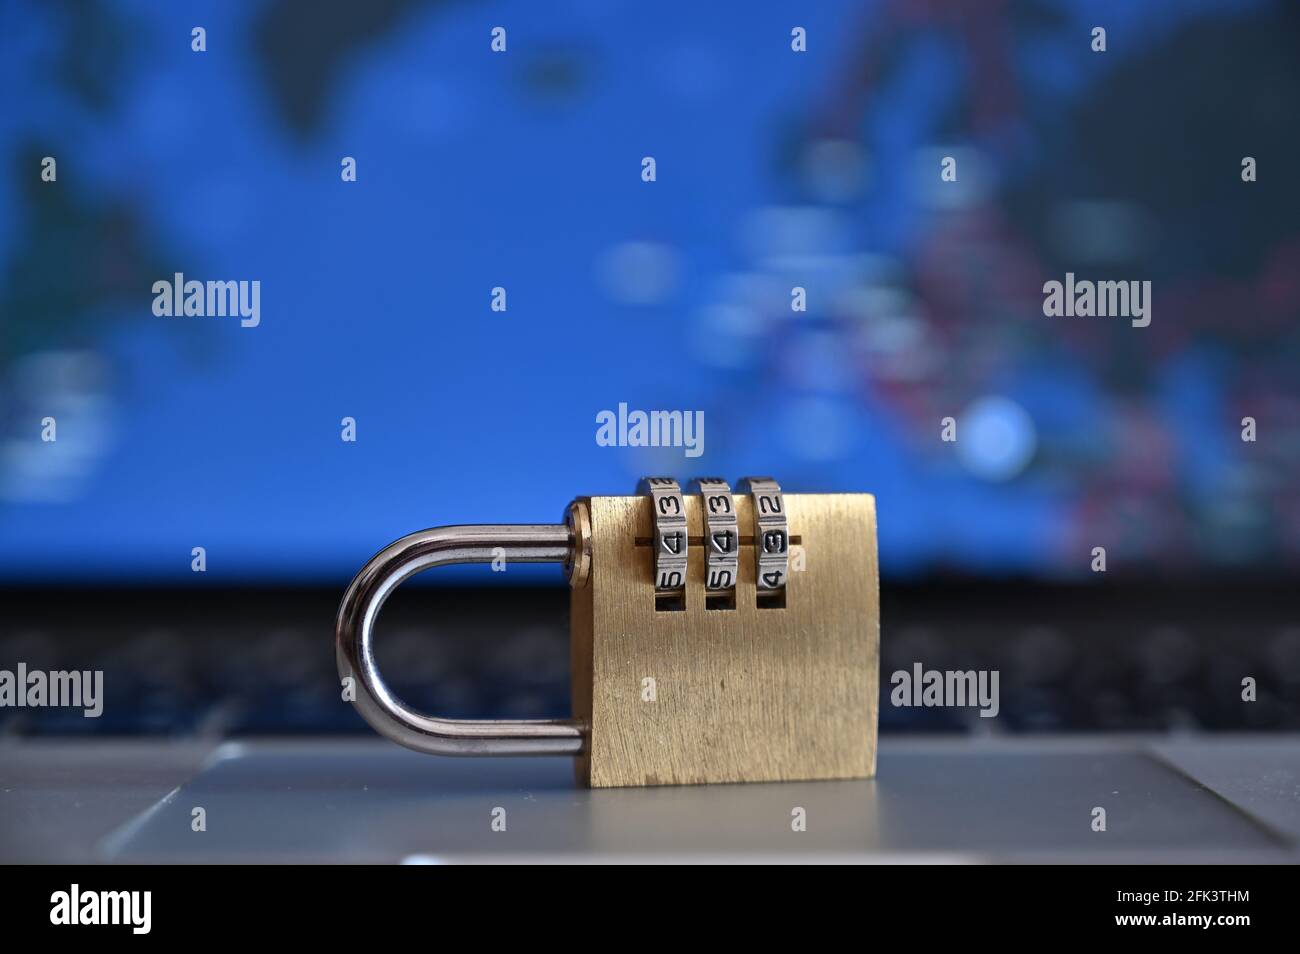 Padlock with blur computer screen. Internet security, concept photo. Security protocol 443. Stock Photo